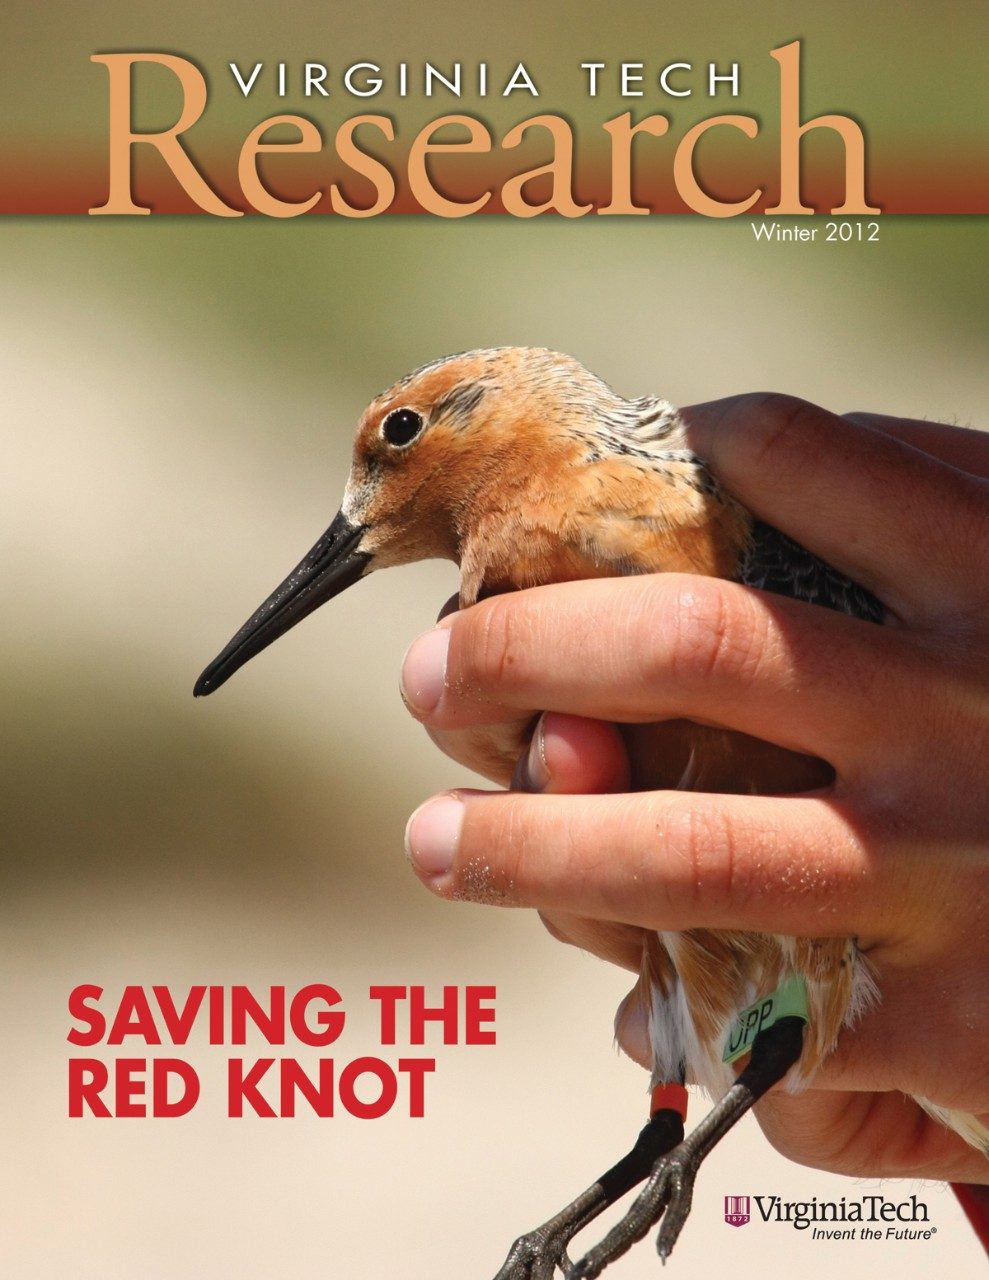 The cover photo for the winter 2012 Virginia Tech research magazine was taken by Brian Gerber of Amherst, Mass., a graduate student in wildlife science in the Virginia Tech College of Natural Resources and Environment.